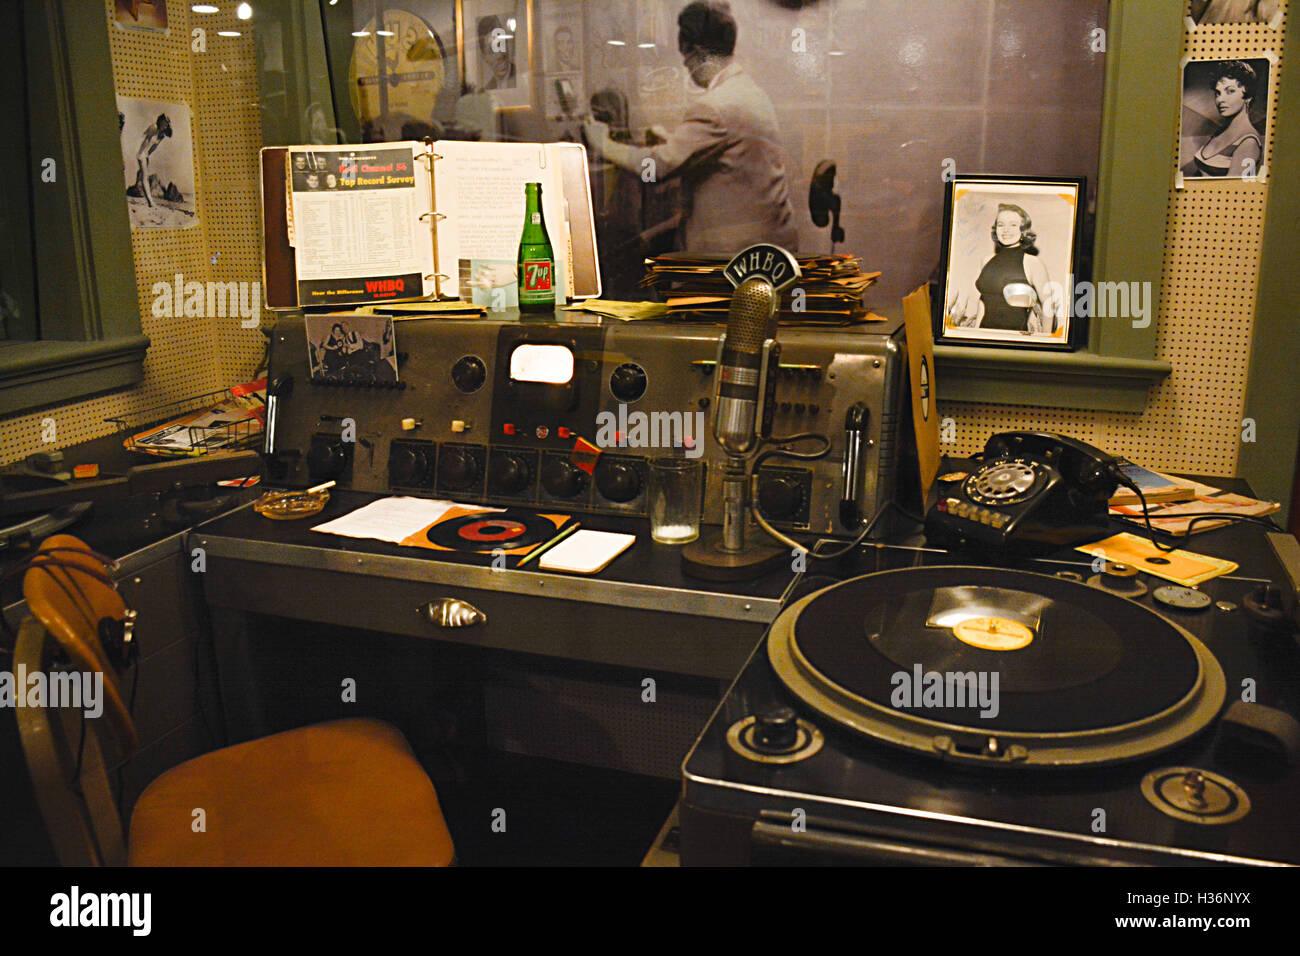 A 'Frozen in Time' look Inside Sam Phillips' vintage recording booth full of equipment & turntables & photos at Sun Records Studio in Memphis, TN, USA Stock Photo